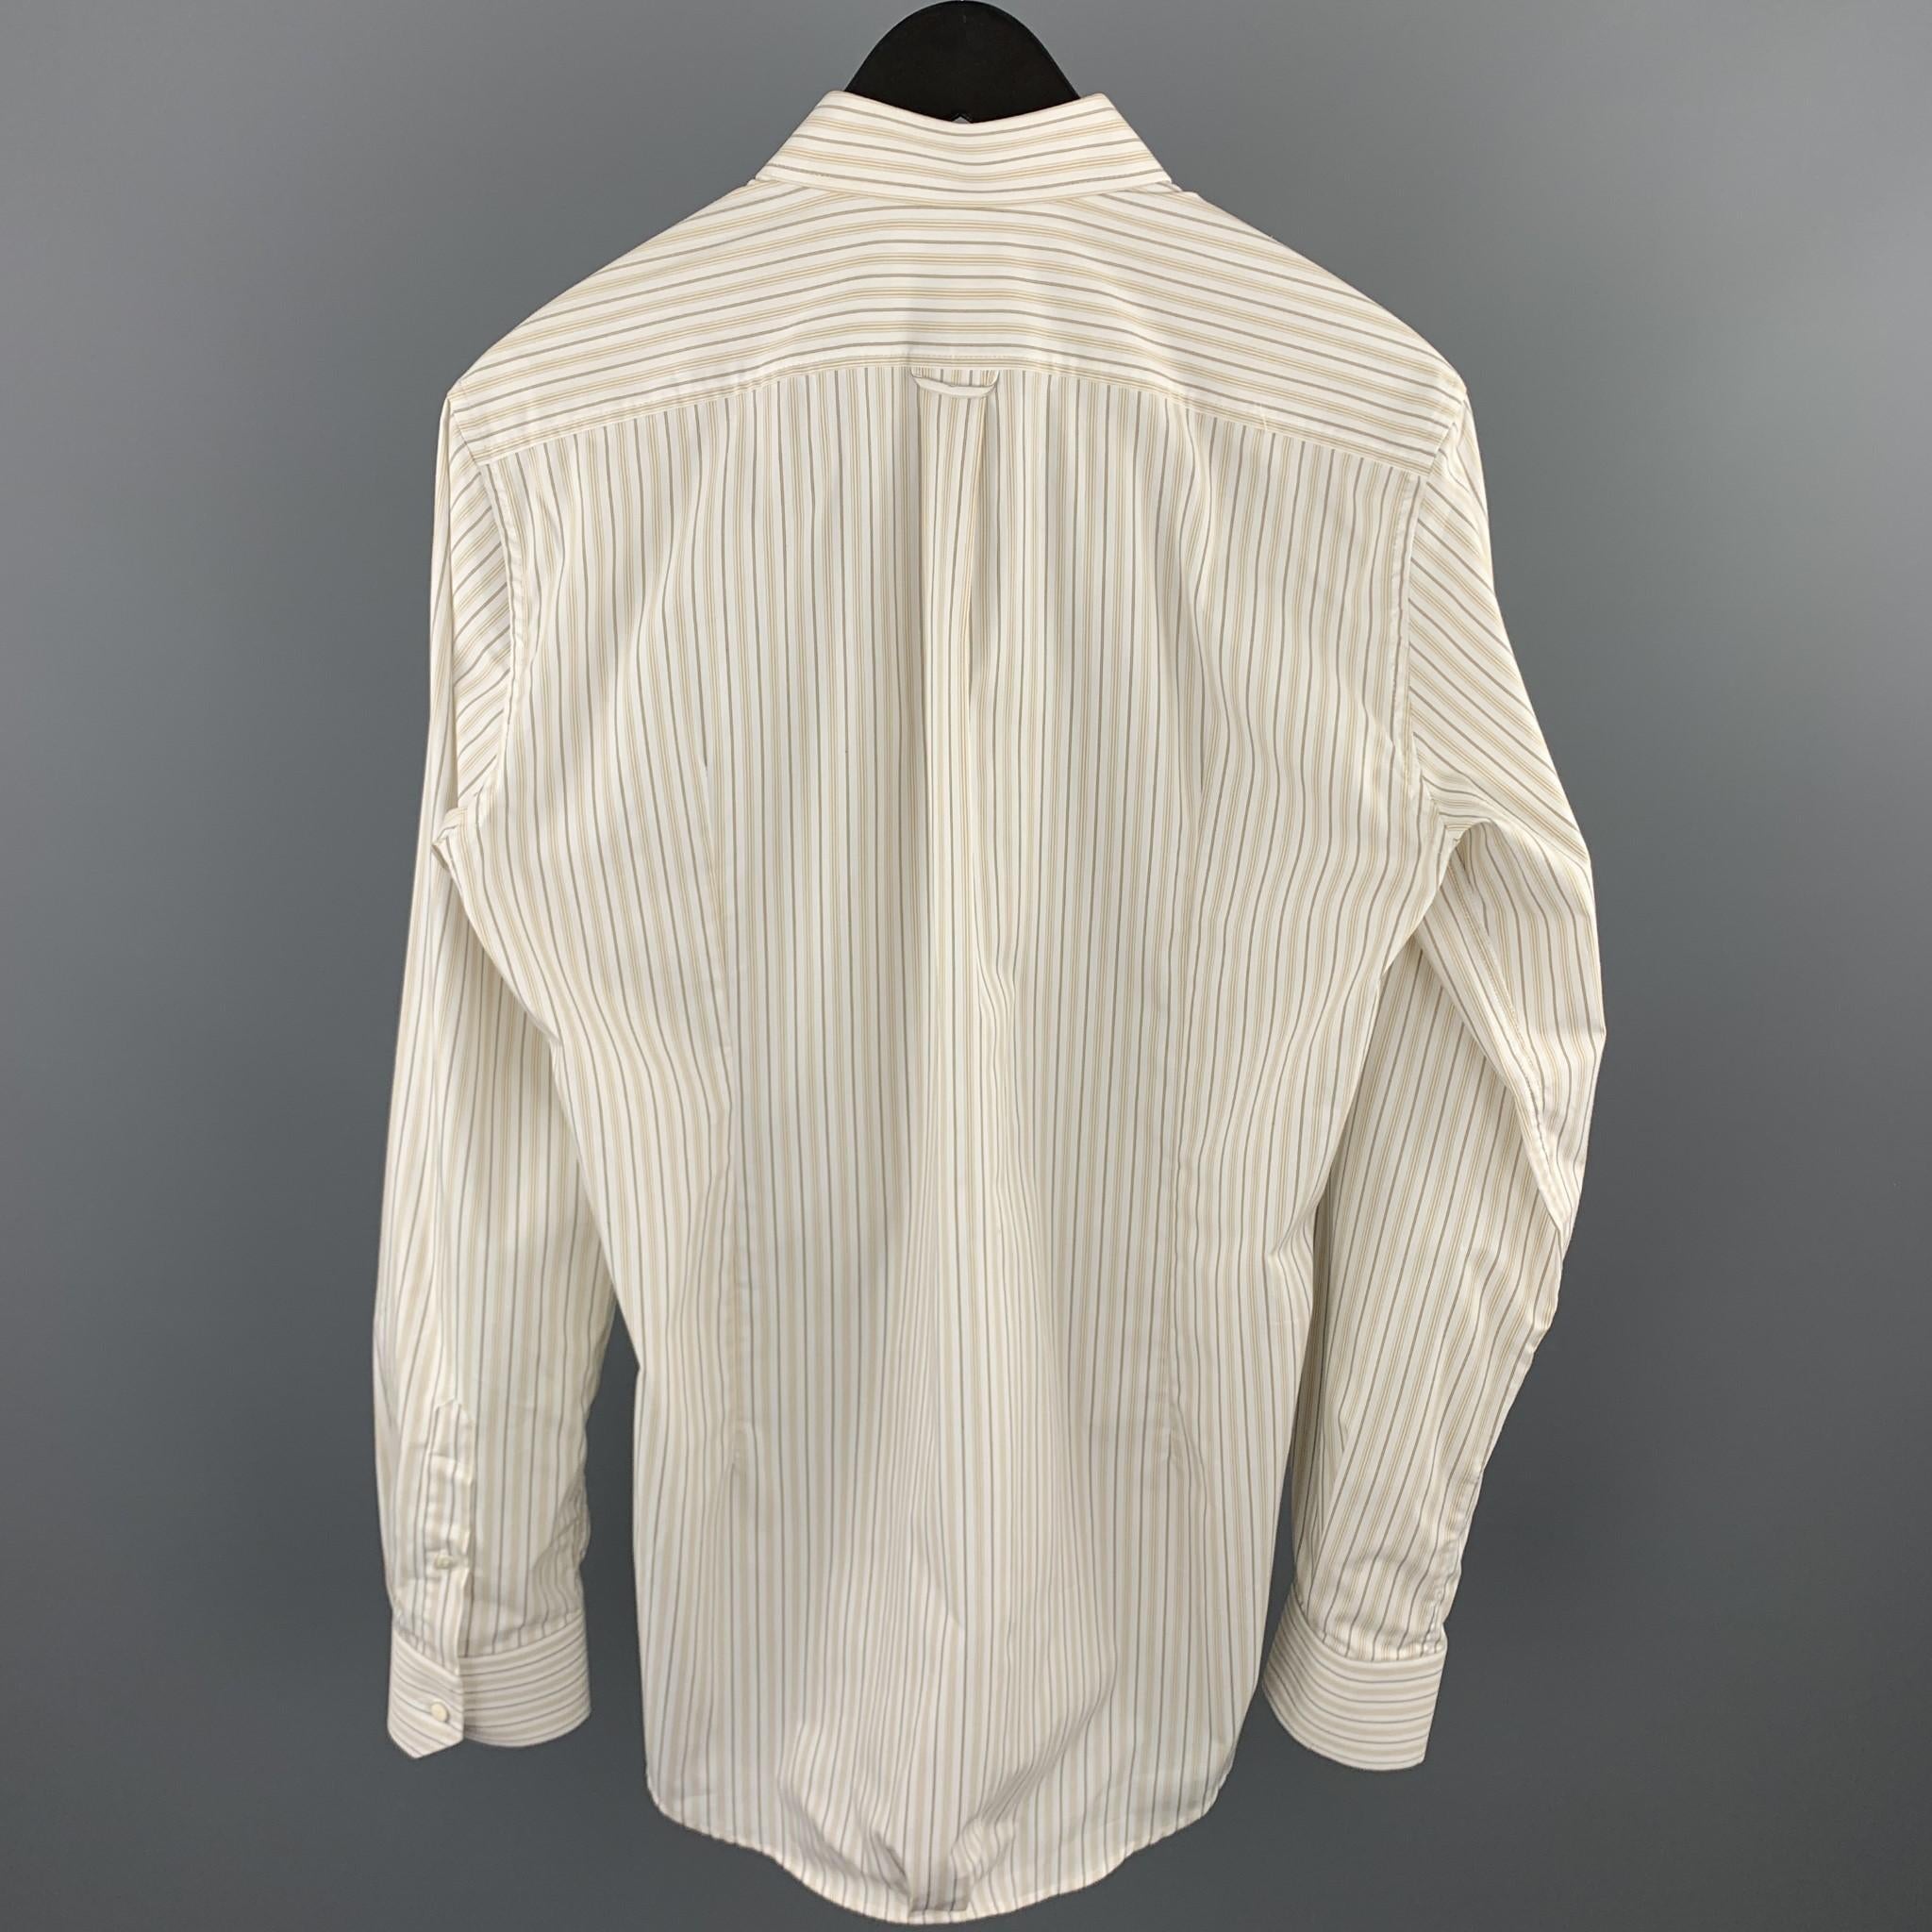 D&G by DOLCE & GABBANA long sleeve shirt comes in a white stripe cotton featuring a button up style and a spread collar. Made in Italy.

Excellent Pre-Owned Condition.
Marked: 15 3/4 - 40

Measurements:

Shoulder: 17 in. 
Chest: 42 in. 
Sleeve: 26.5